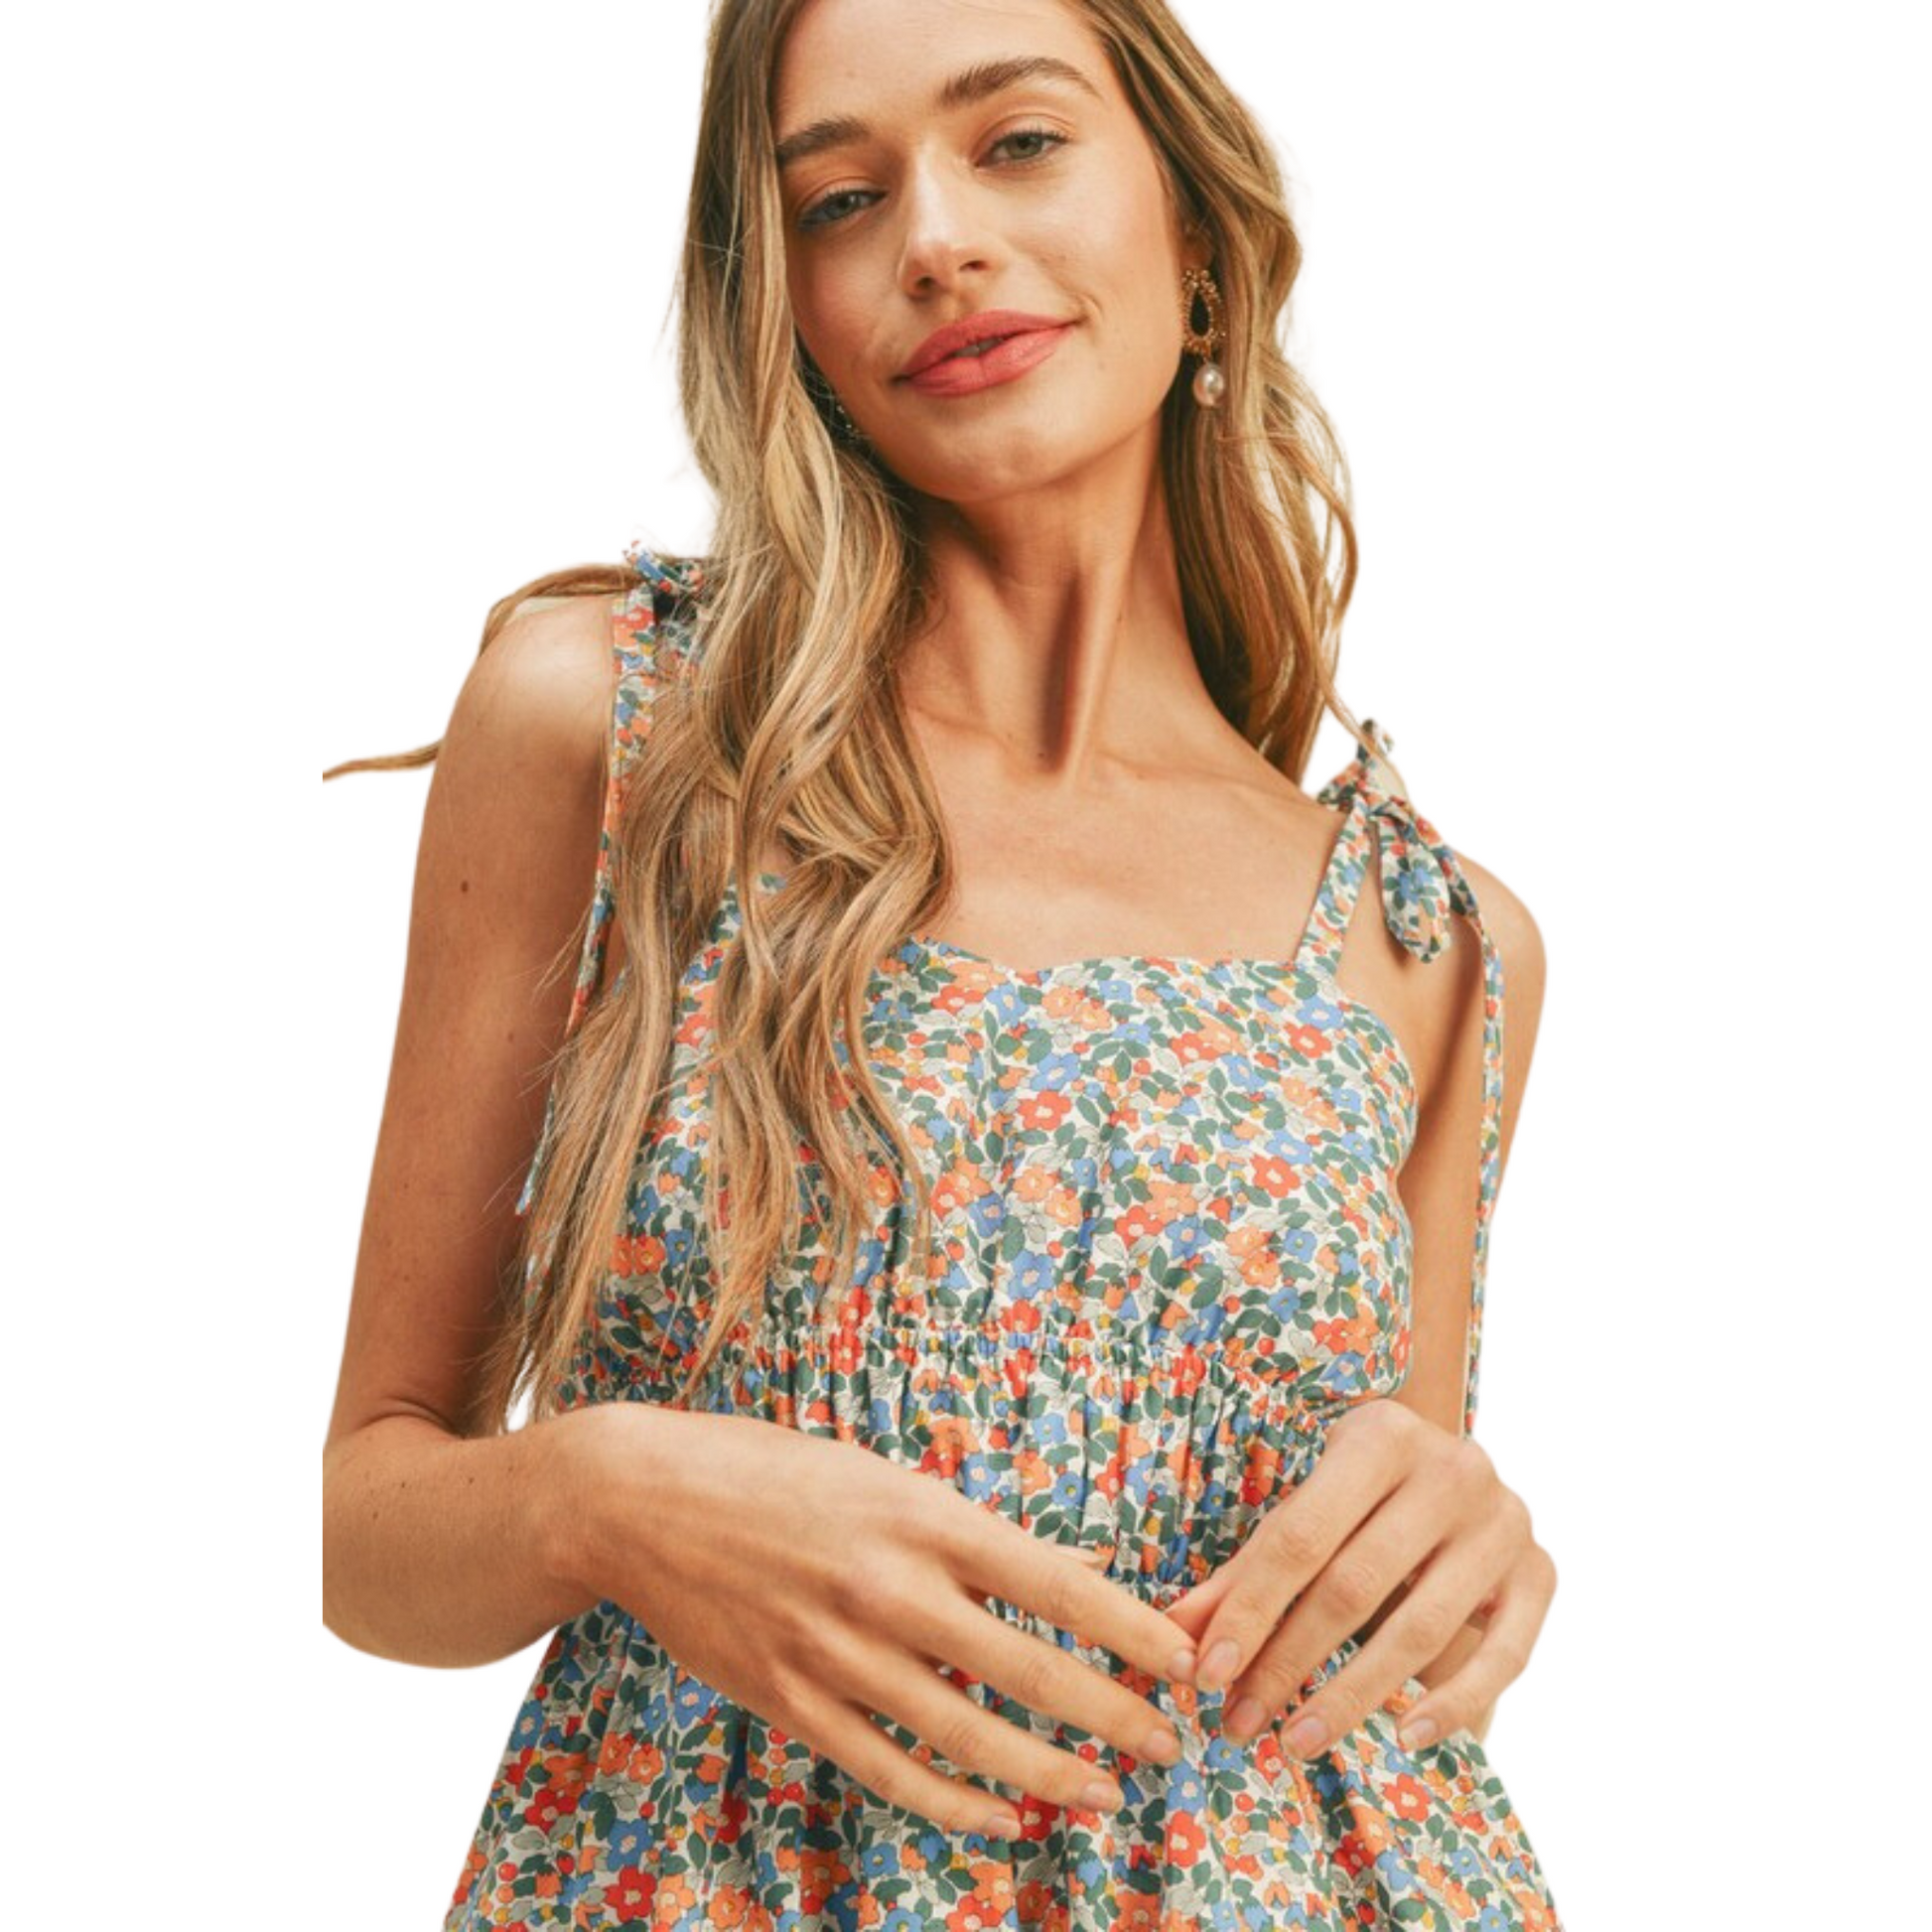 This Bubble Hem Mini Dress is designed to flatter your figure. Its sweetheart neckline and floral print give it a romantic vibe, while its mini silhouette offers a touch of fun. Perfect for special occasions or everyday wear.